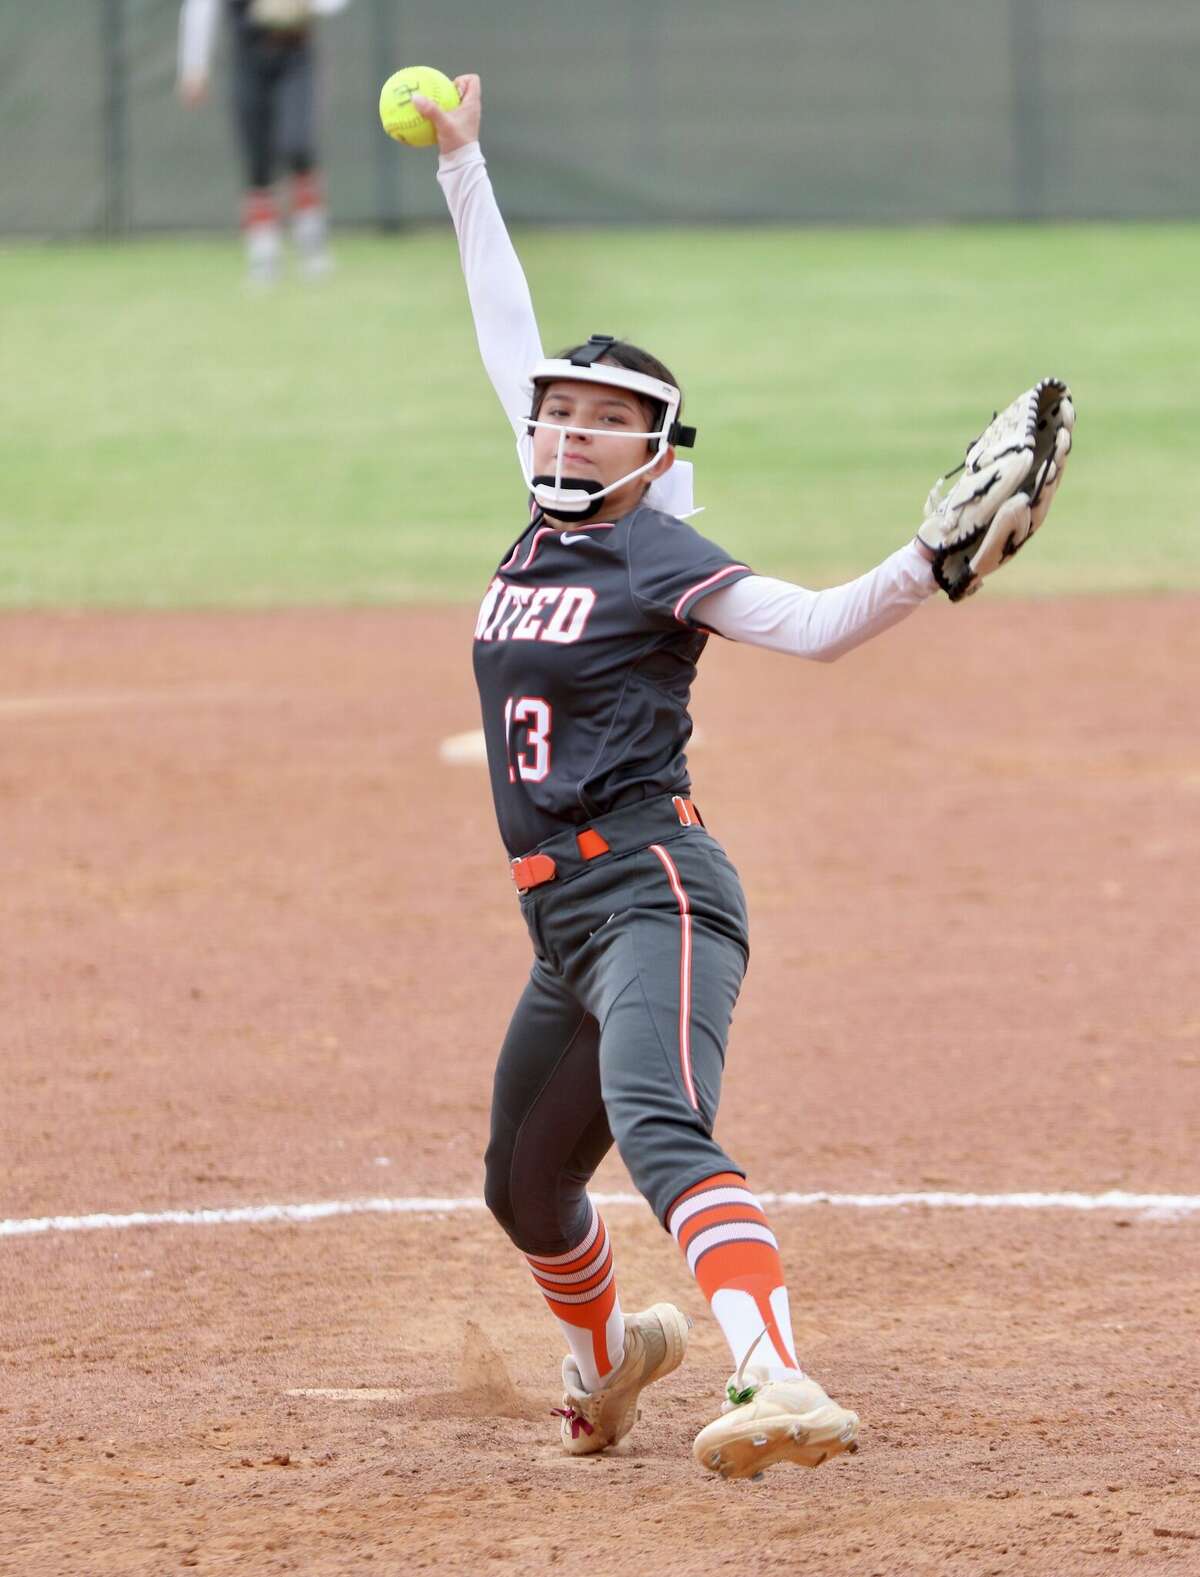 The United Lady Longhorns are one of the best teams in Laredo early this season.